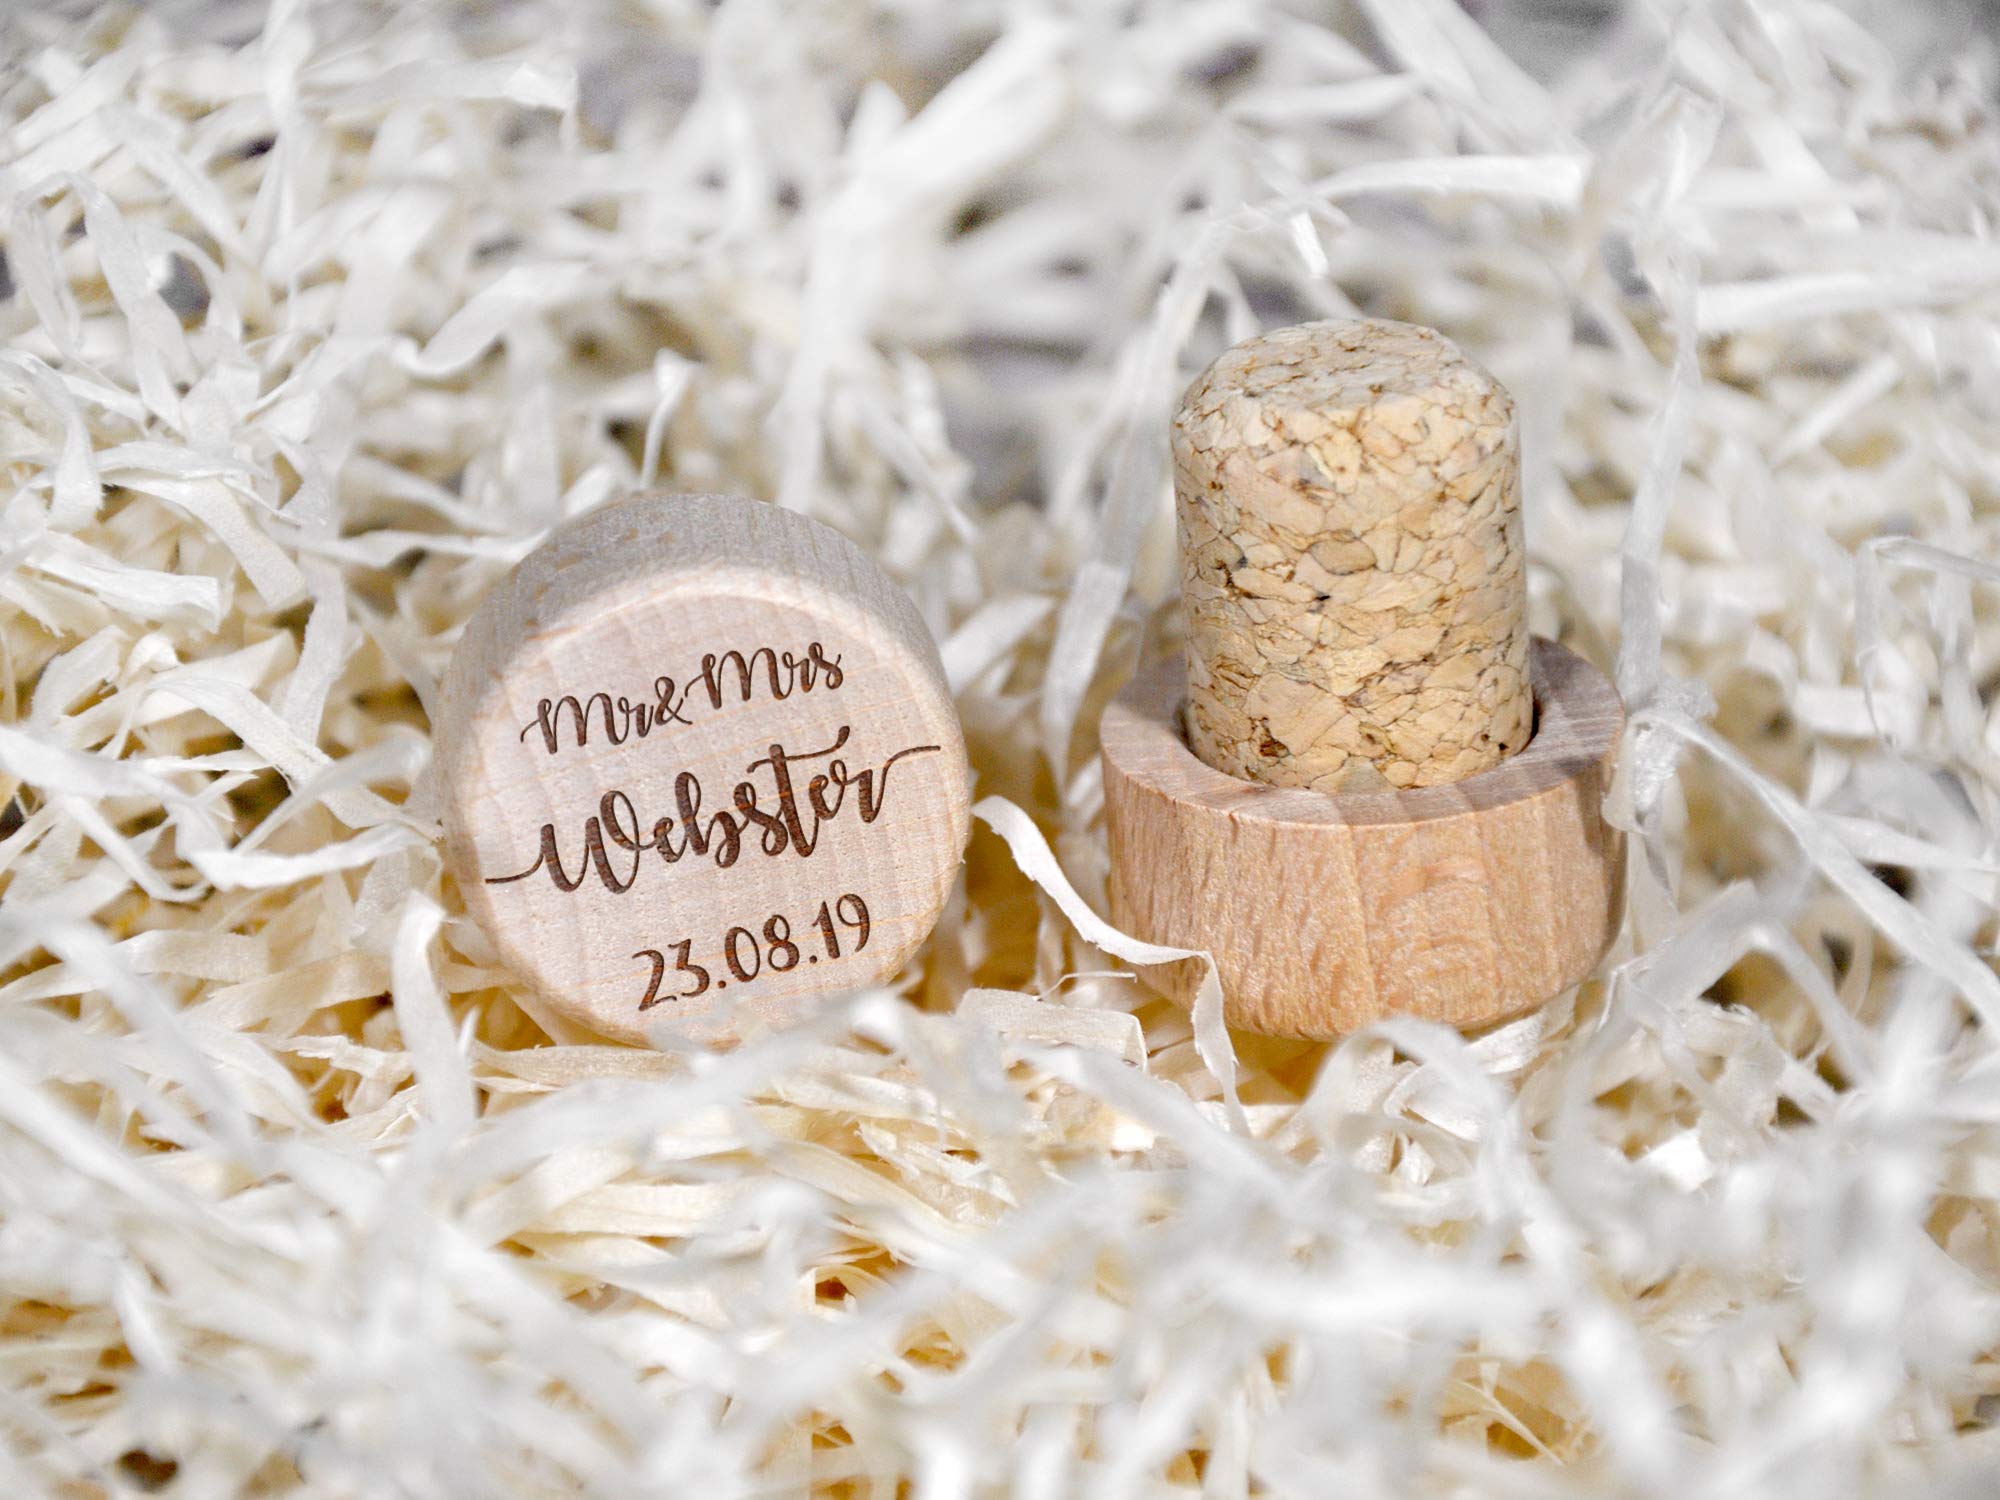 Custom Wine Stopper Personalized Party Favors Etched Wine Corks Housewarming Gift for Couple Engraved Wine Bottle Toppers Keepsake Gift Wine Gifts Personalized Wedding Gift Wine Stoppers Bulk